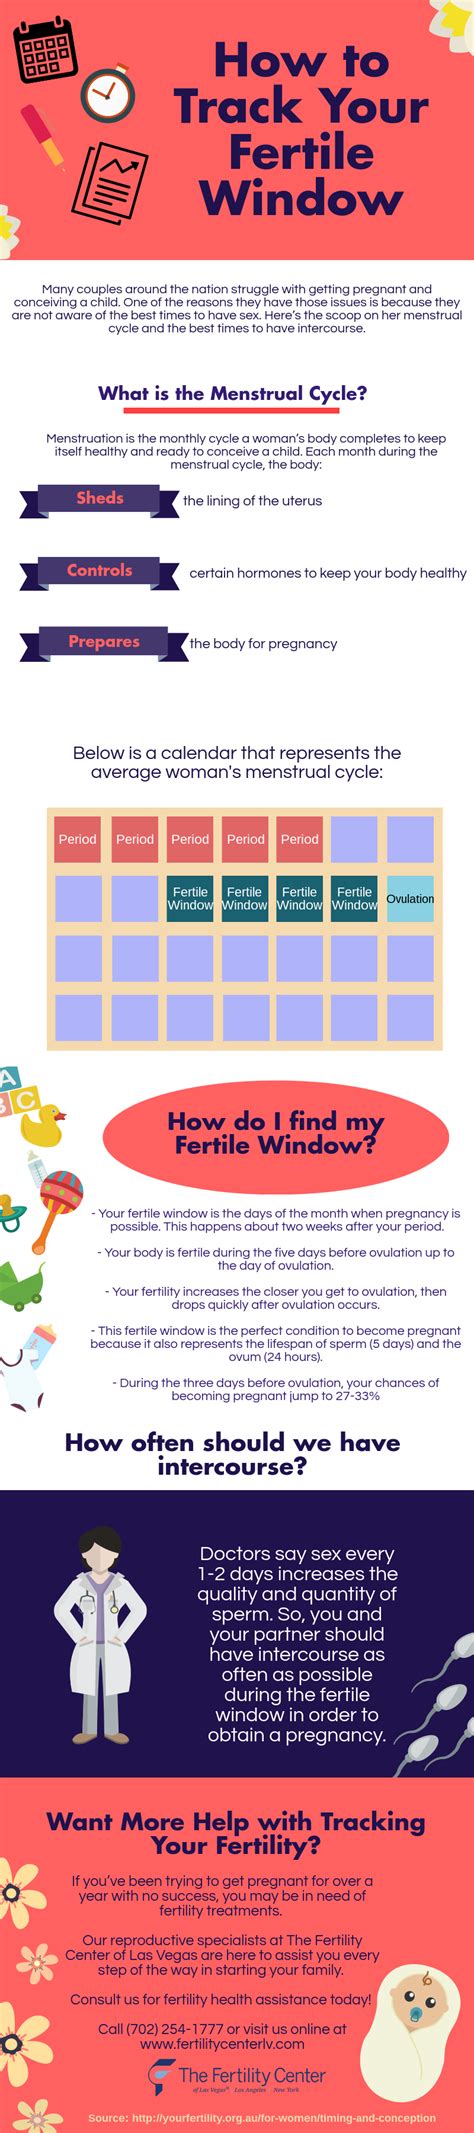 How To Track Your Fertile Window Infographic